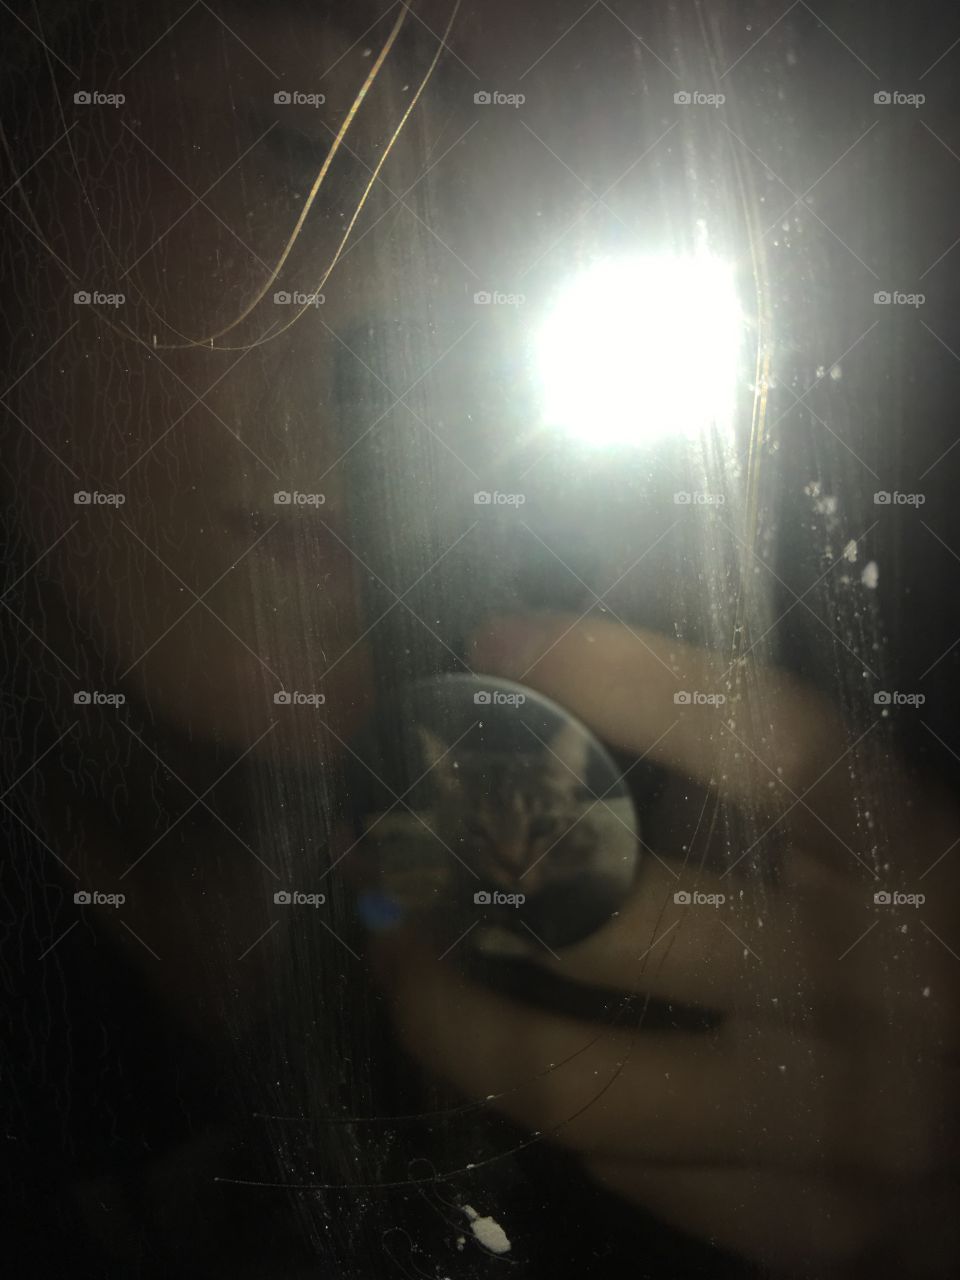 Man taken photo in the mirror with flash and darkness